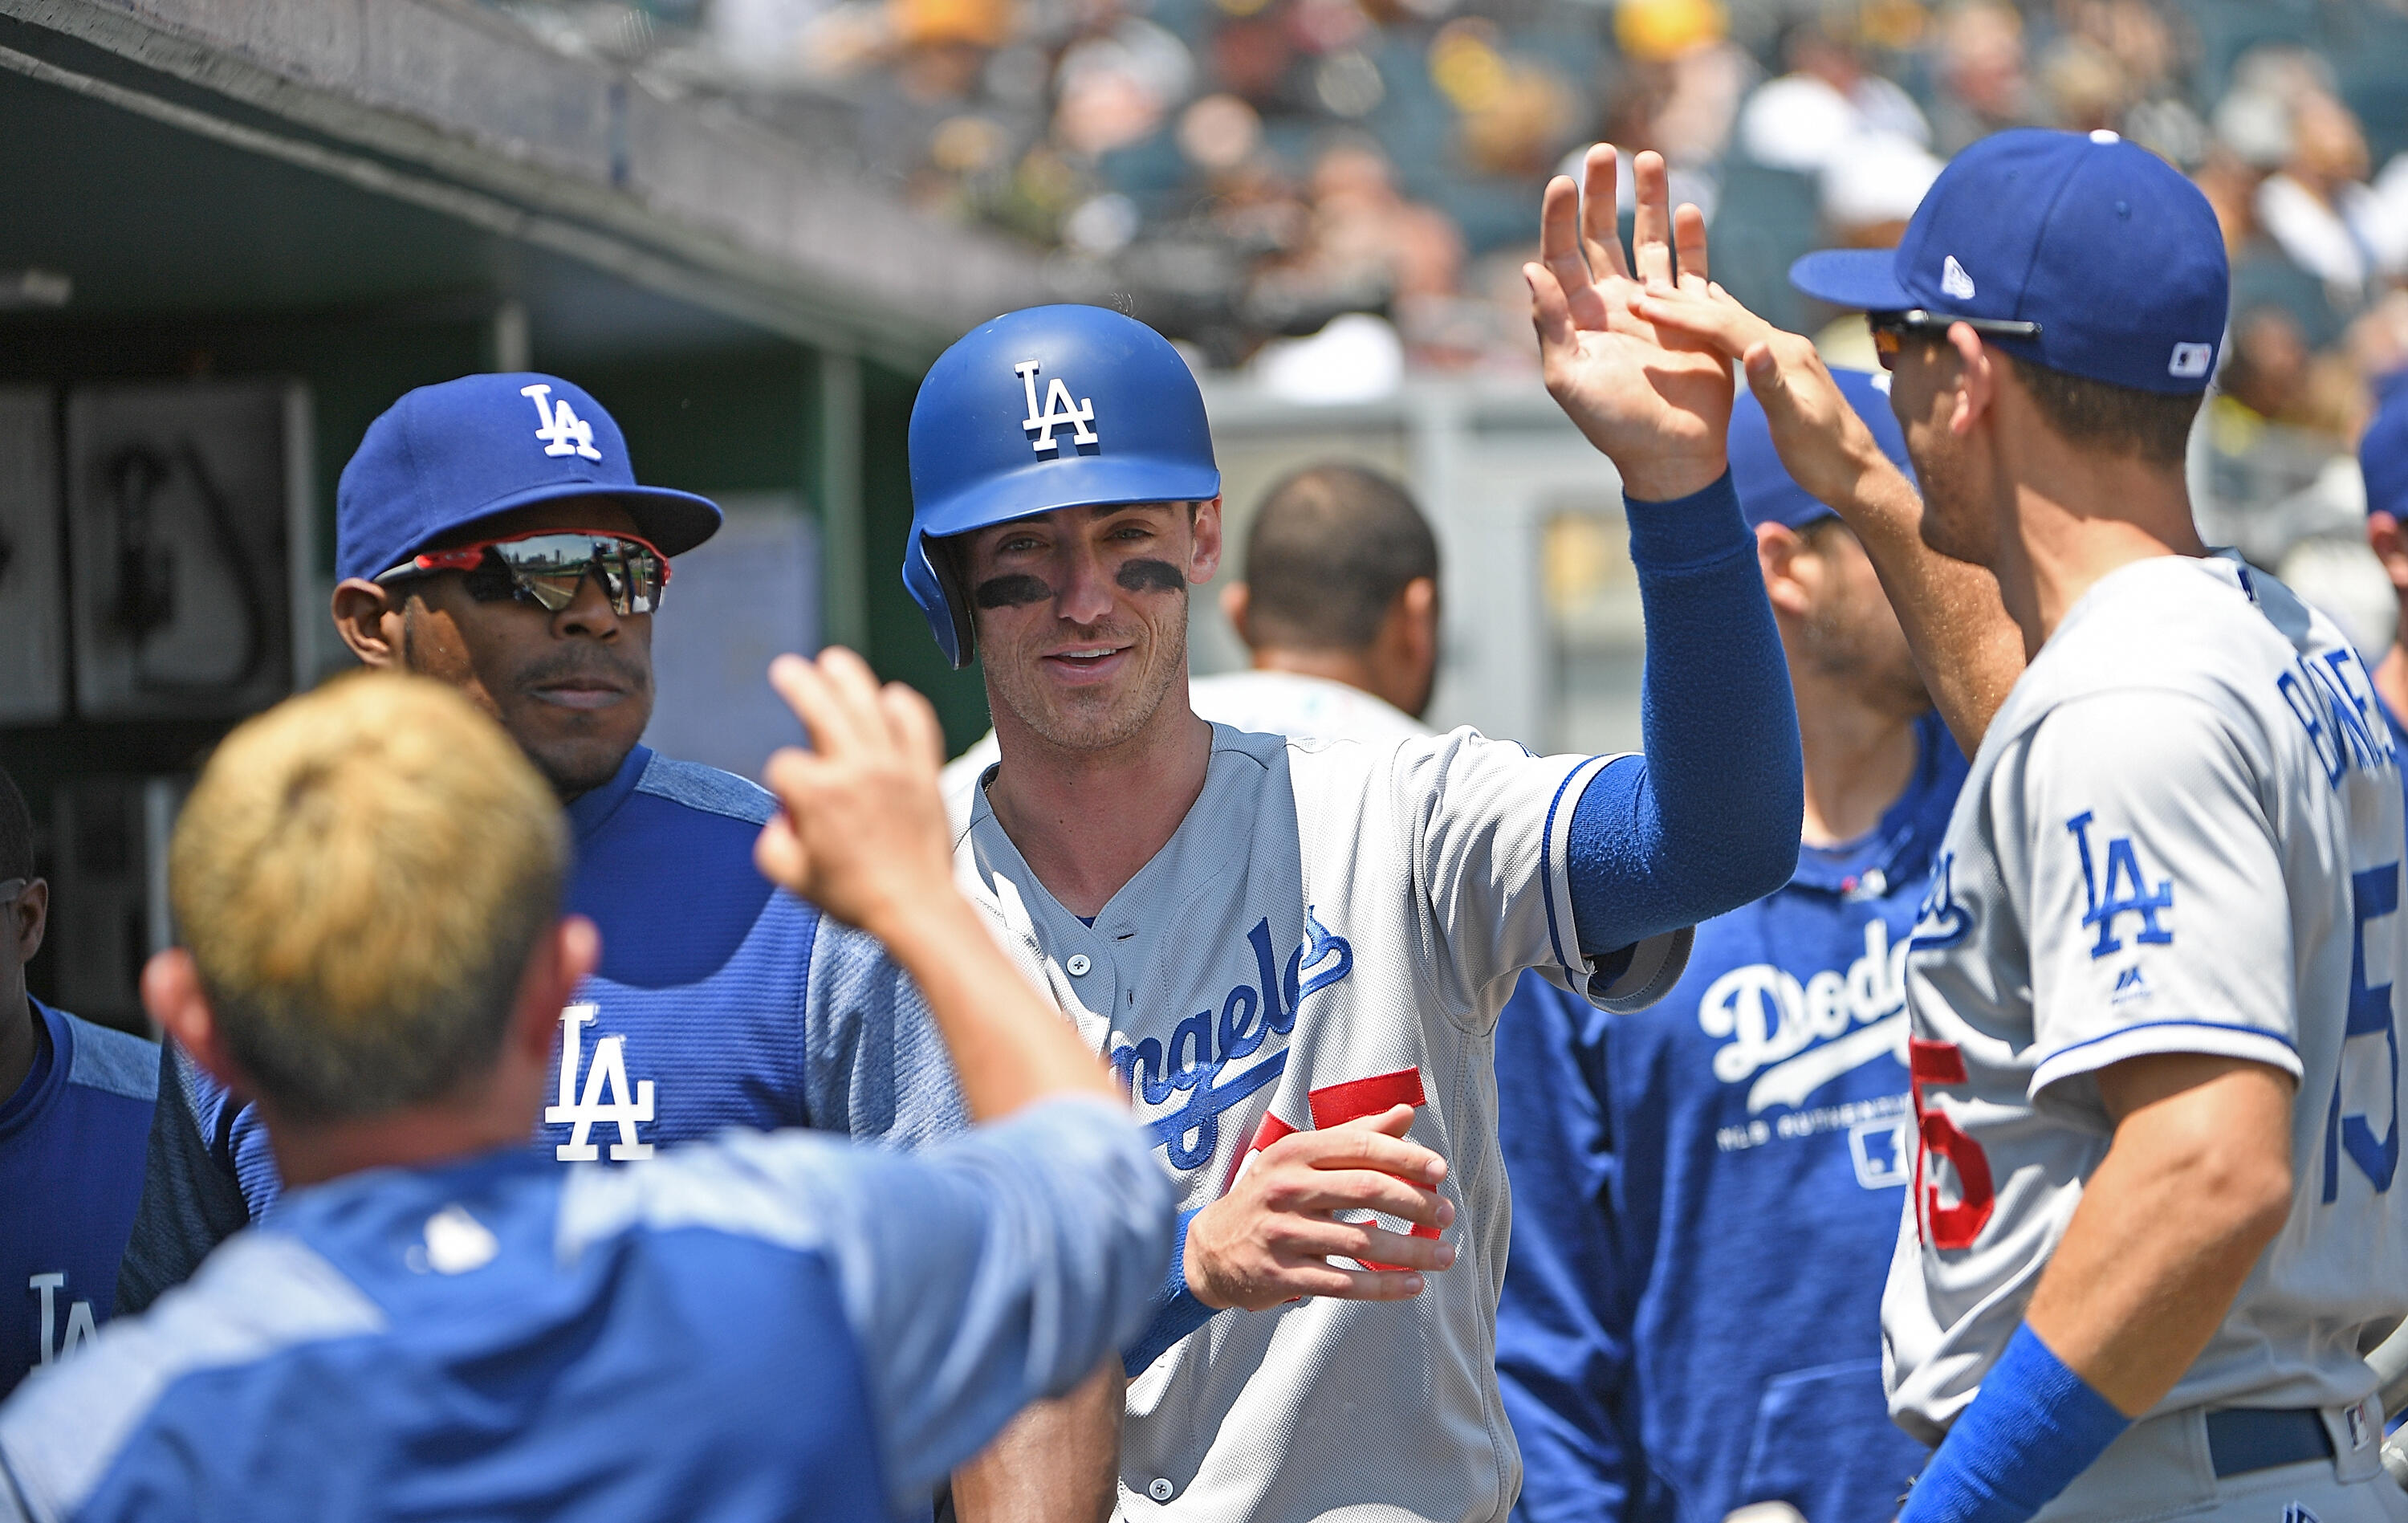 Dodgers Highlights: Boys In Blue Go 5-1 On Road Trip - Thumbnail Image